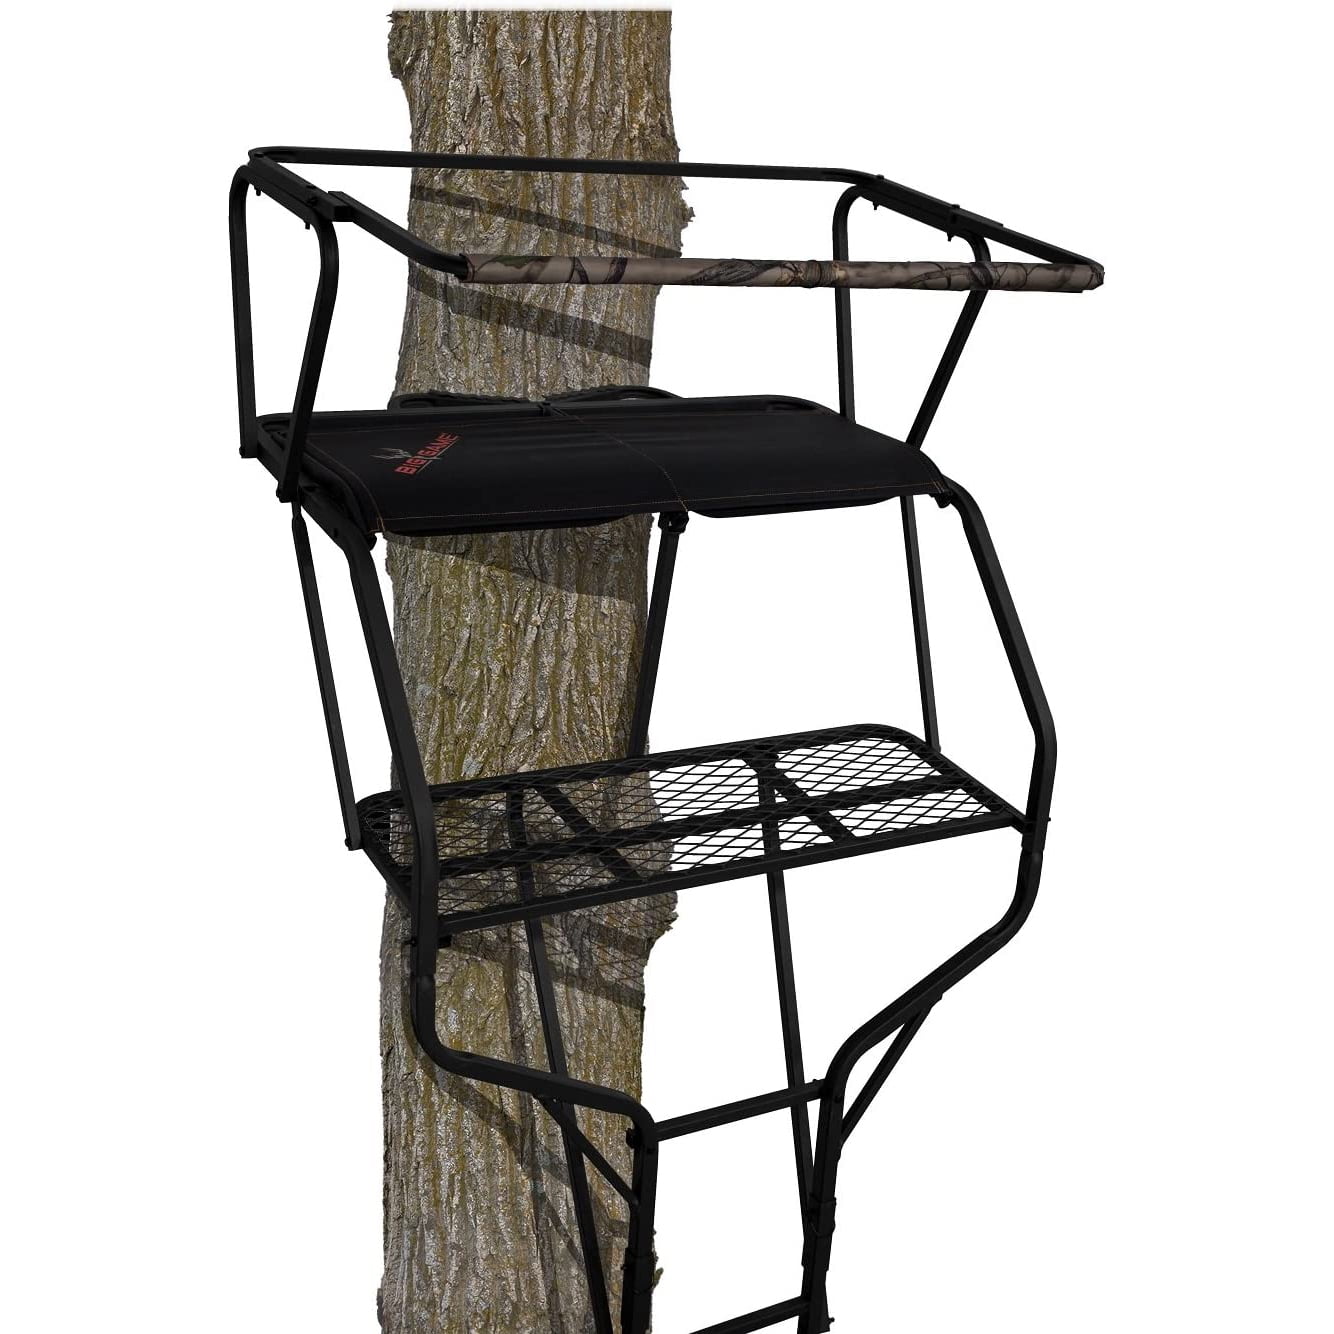 Big Game Treestands Big Game Guardian XLT 18-Foot Hunting Lightweight 2 Person Ladder Tree Stand